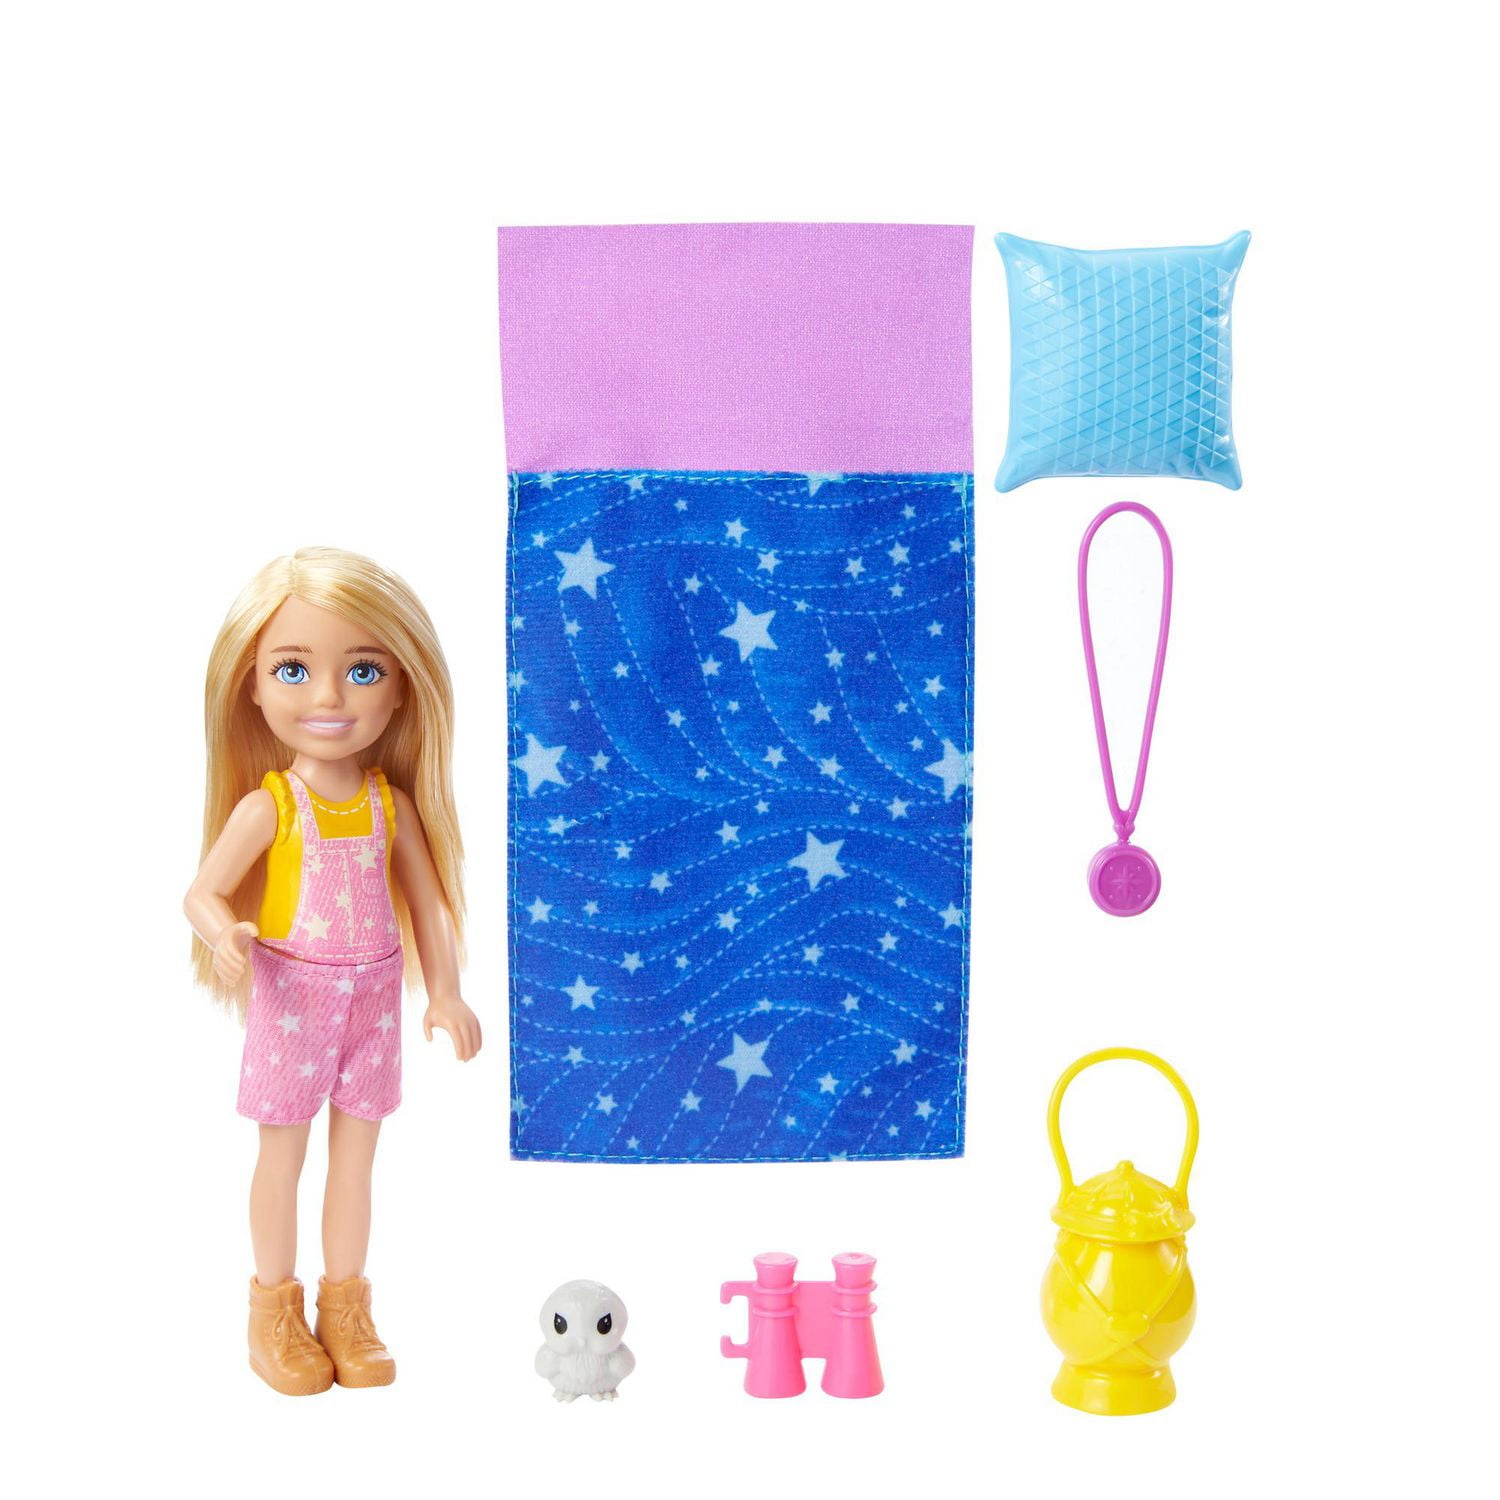 New Barbie travel doll playsets with suitcase, puppy and accessories 2022 